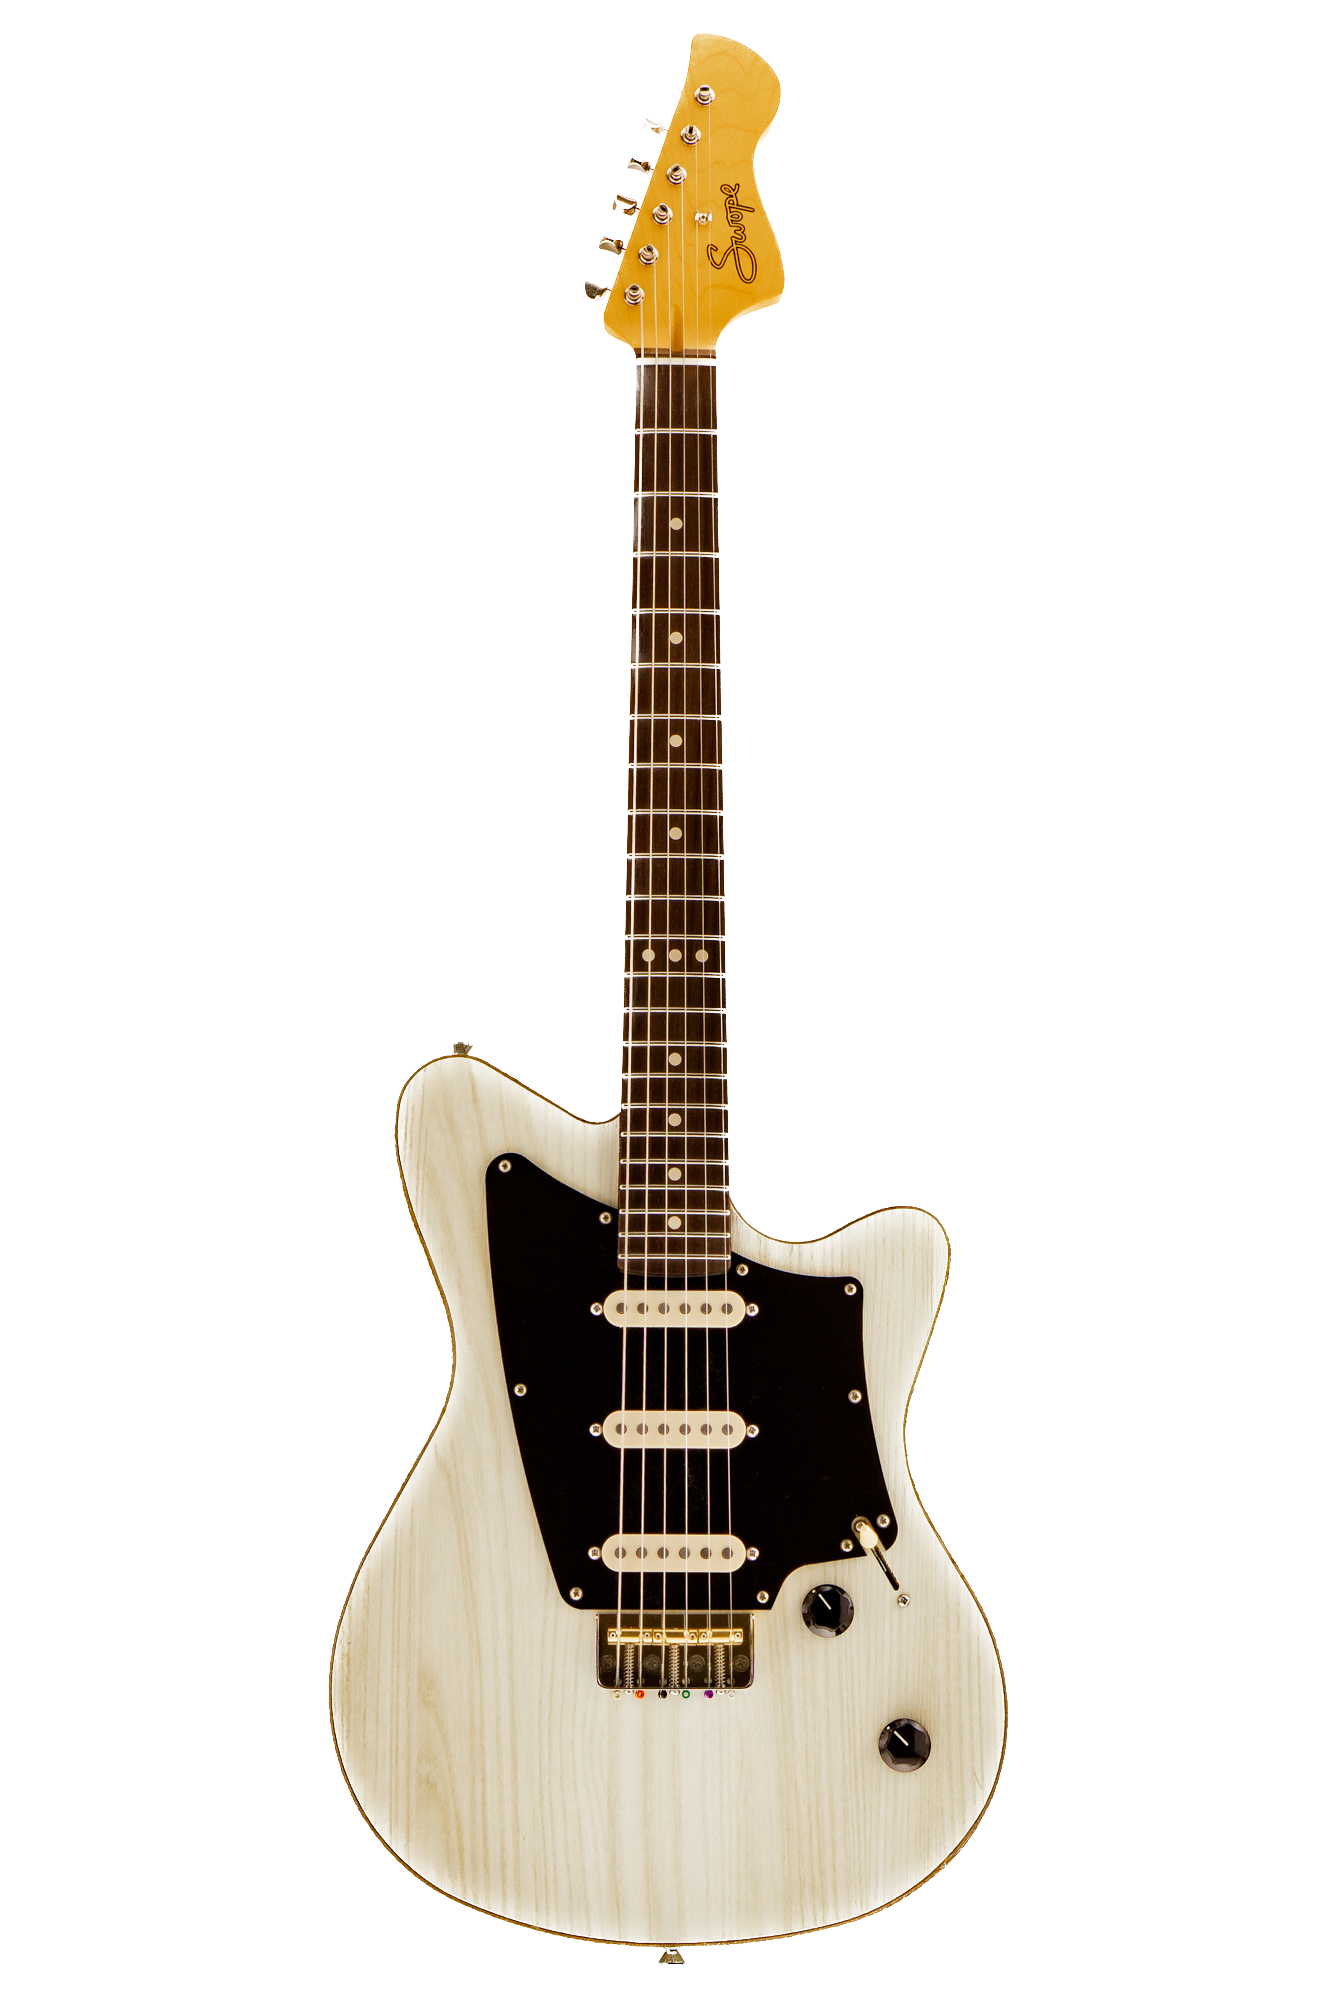 Biscayne electric guitar.